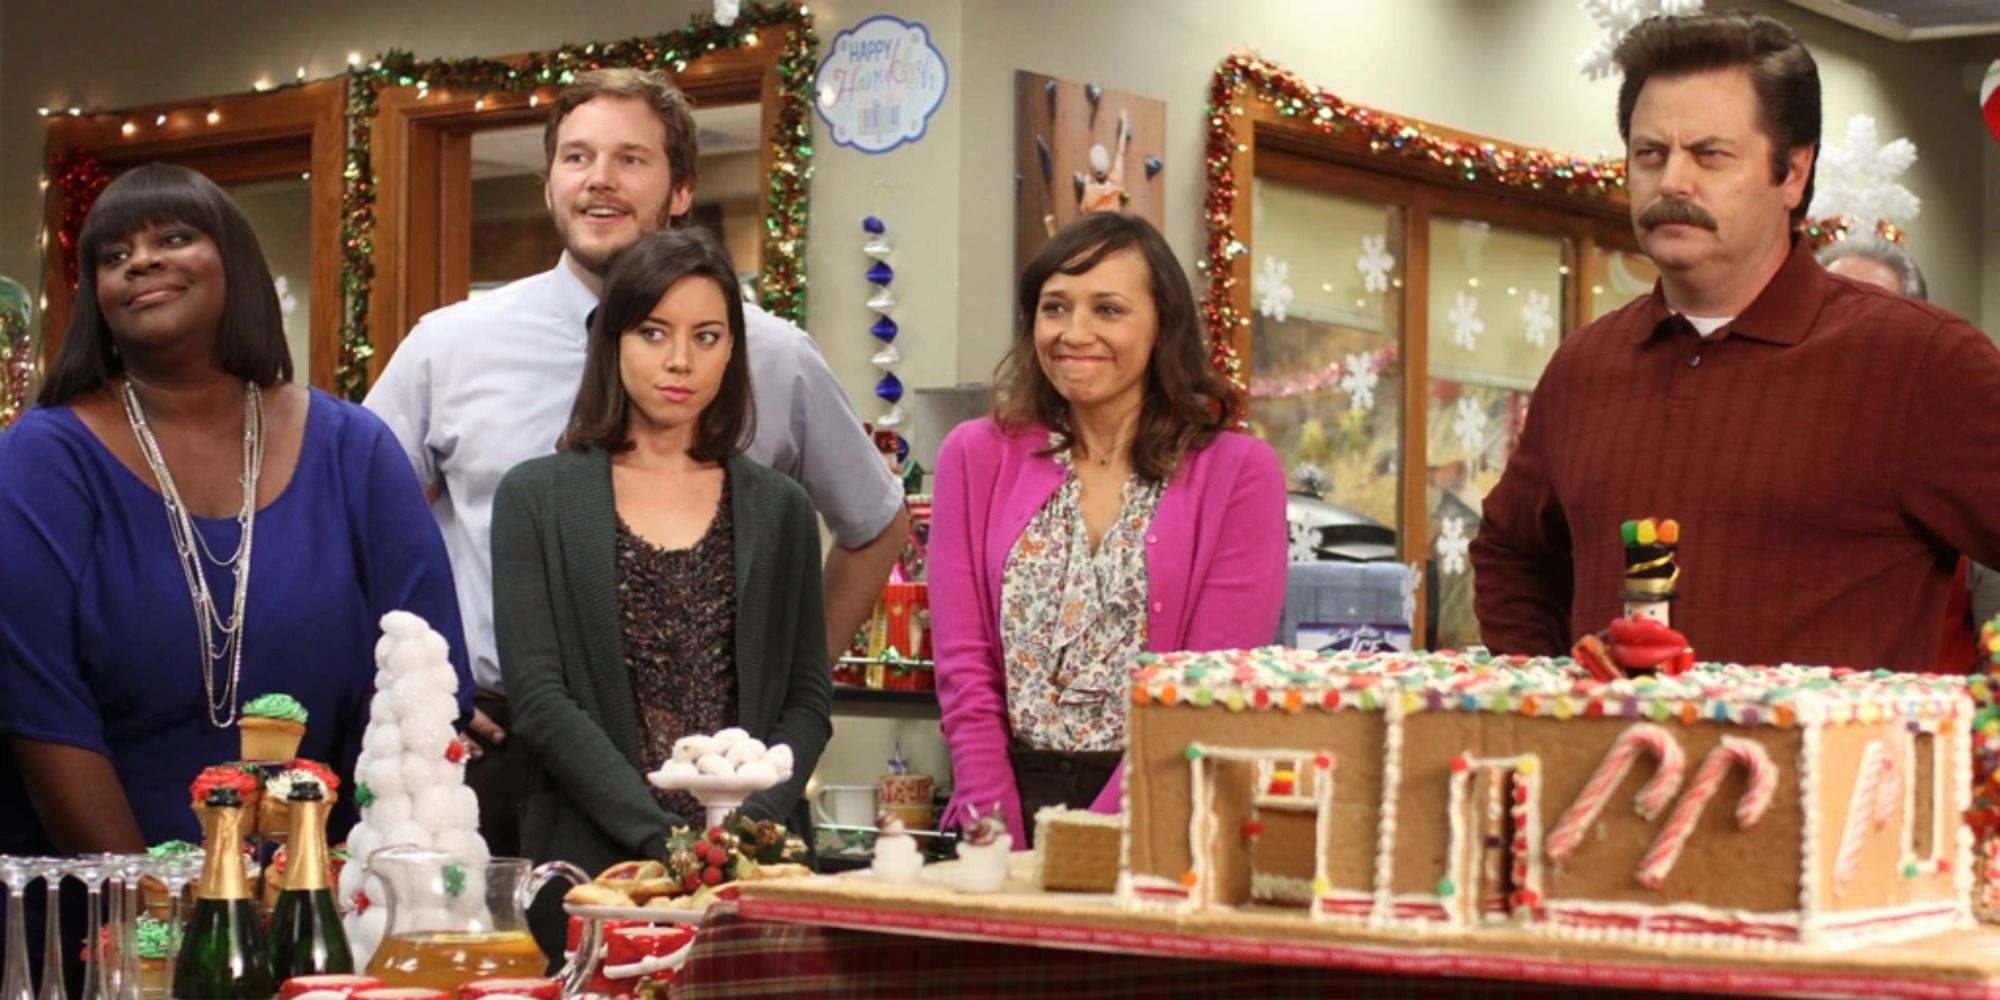 Donna, Andy, April, Ann, and Ron in a Christmas episode of Parks and Recreation